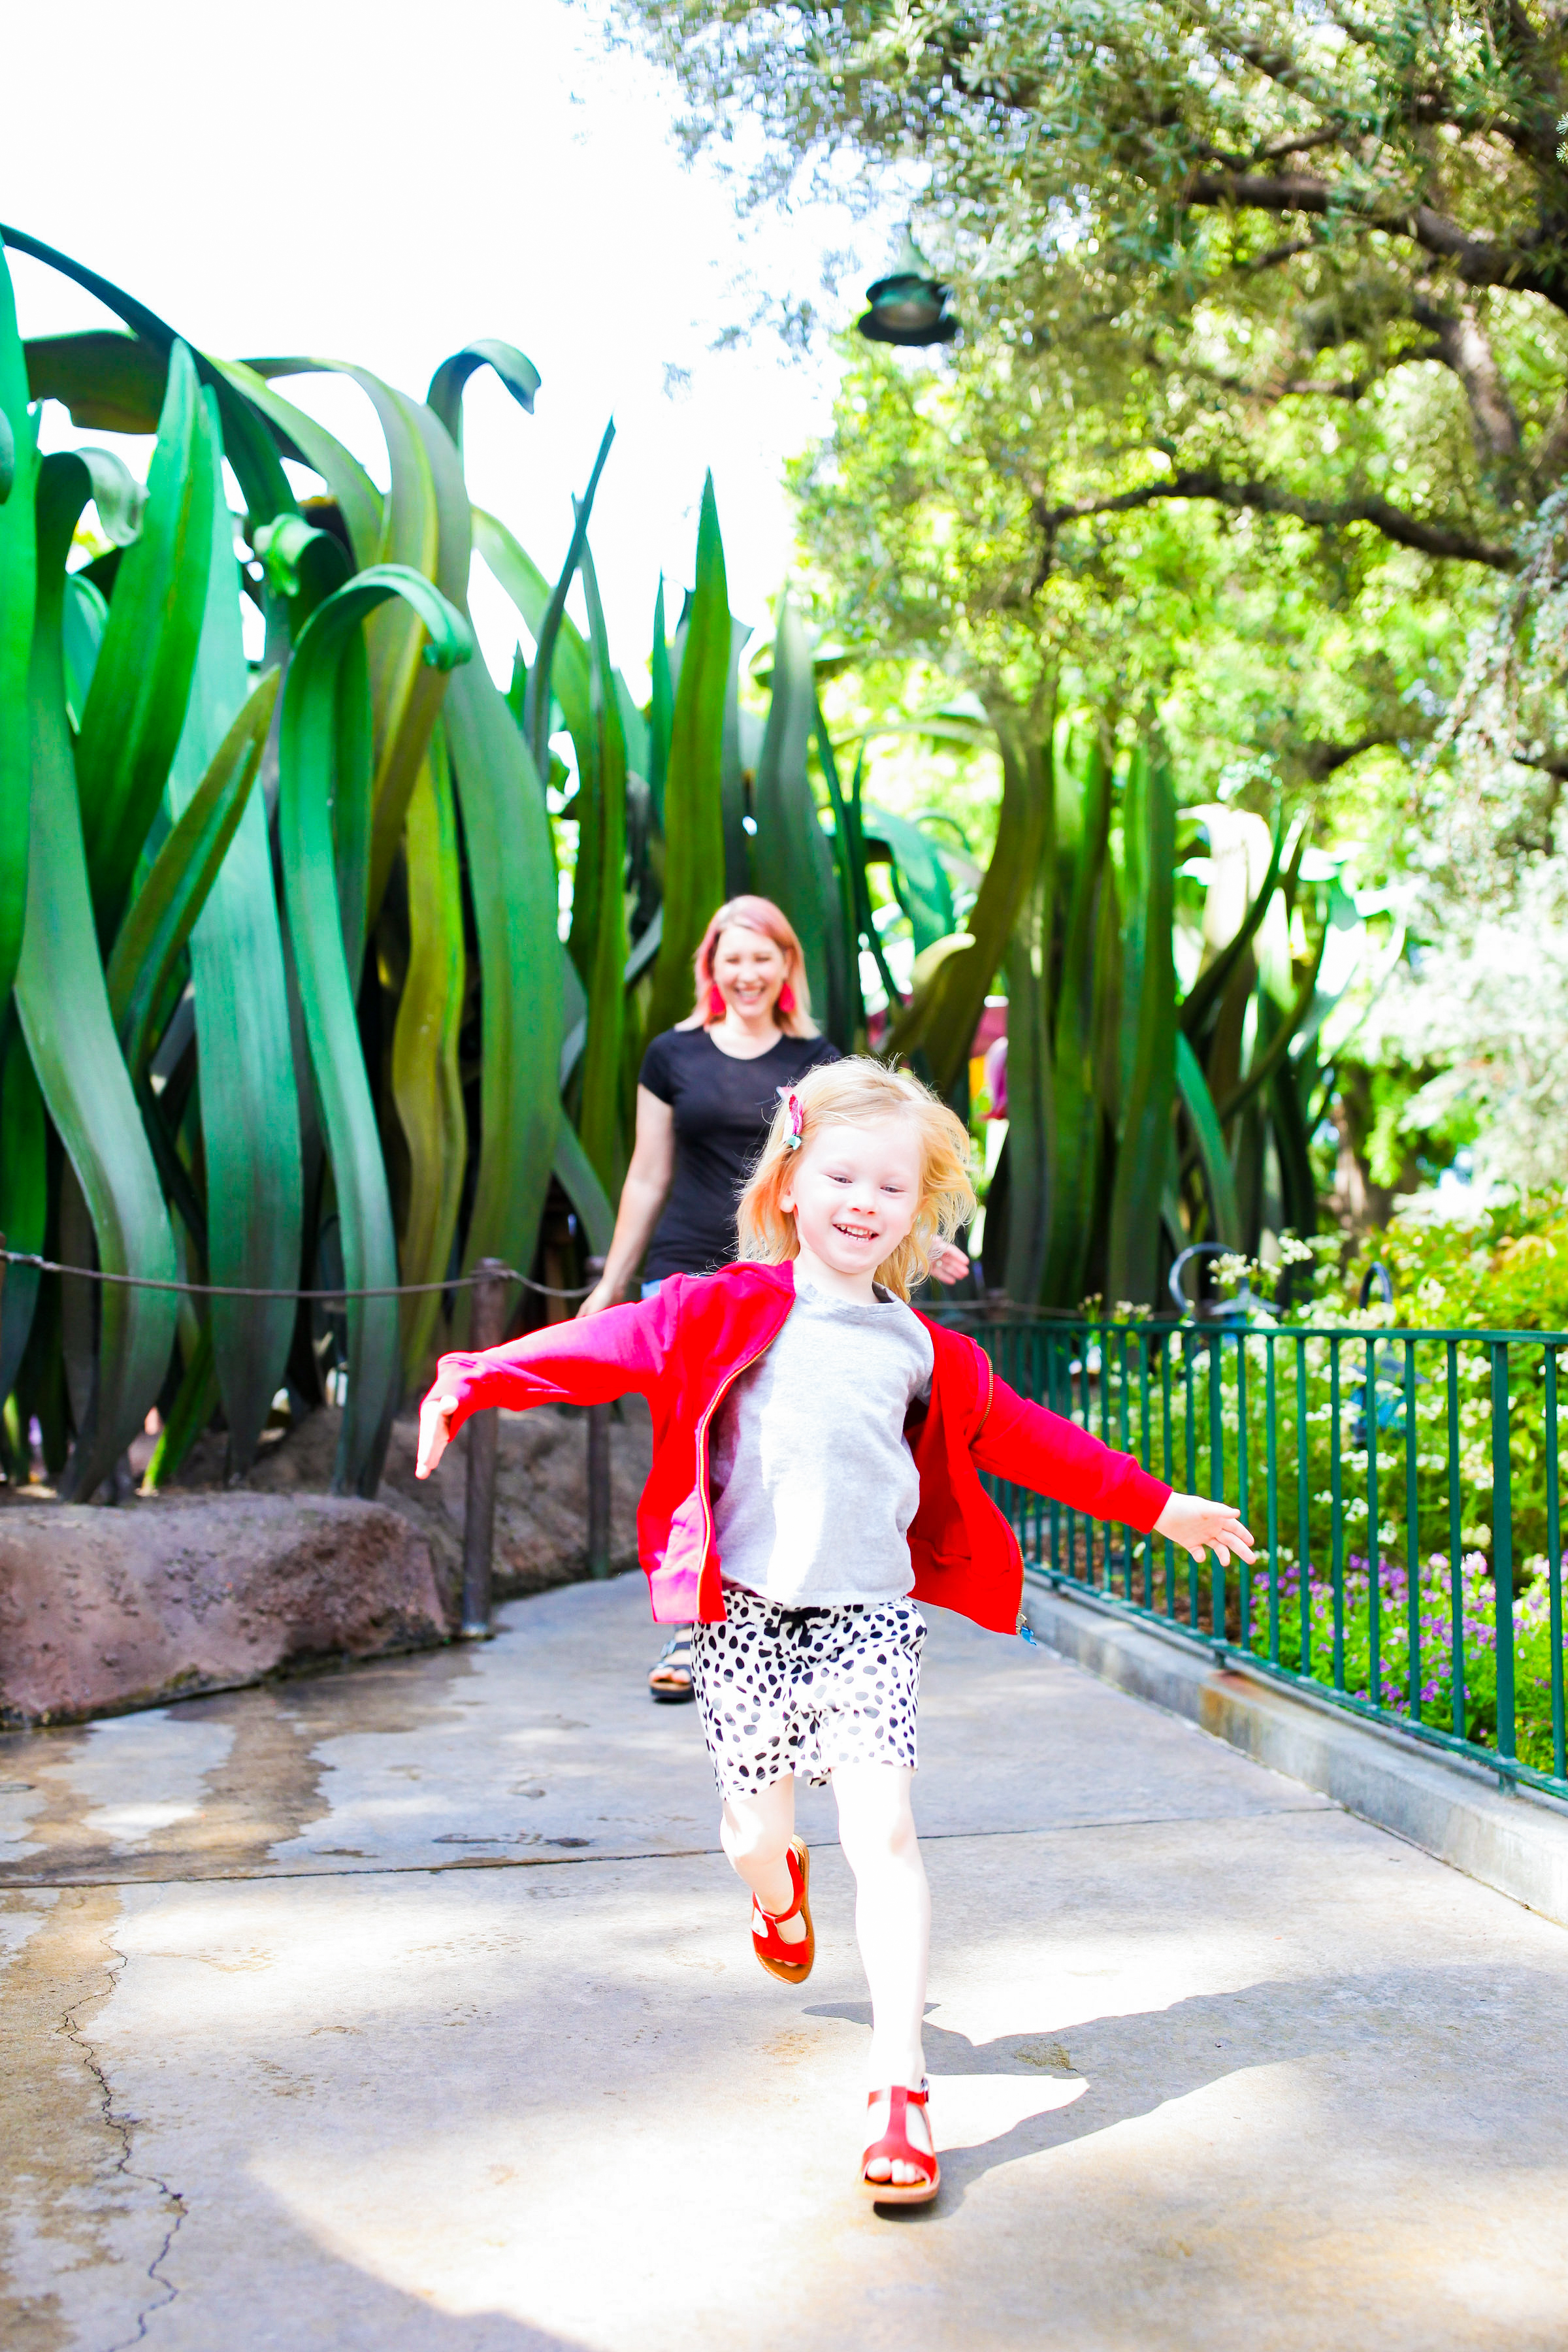 Not that into rides? This list has 100 things to do at Disneyland that AREN'T rides!